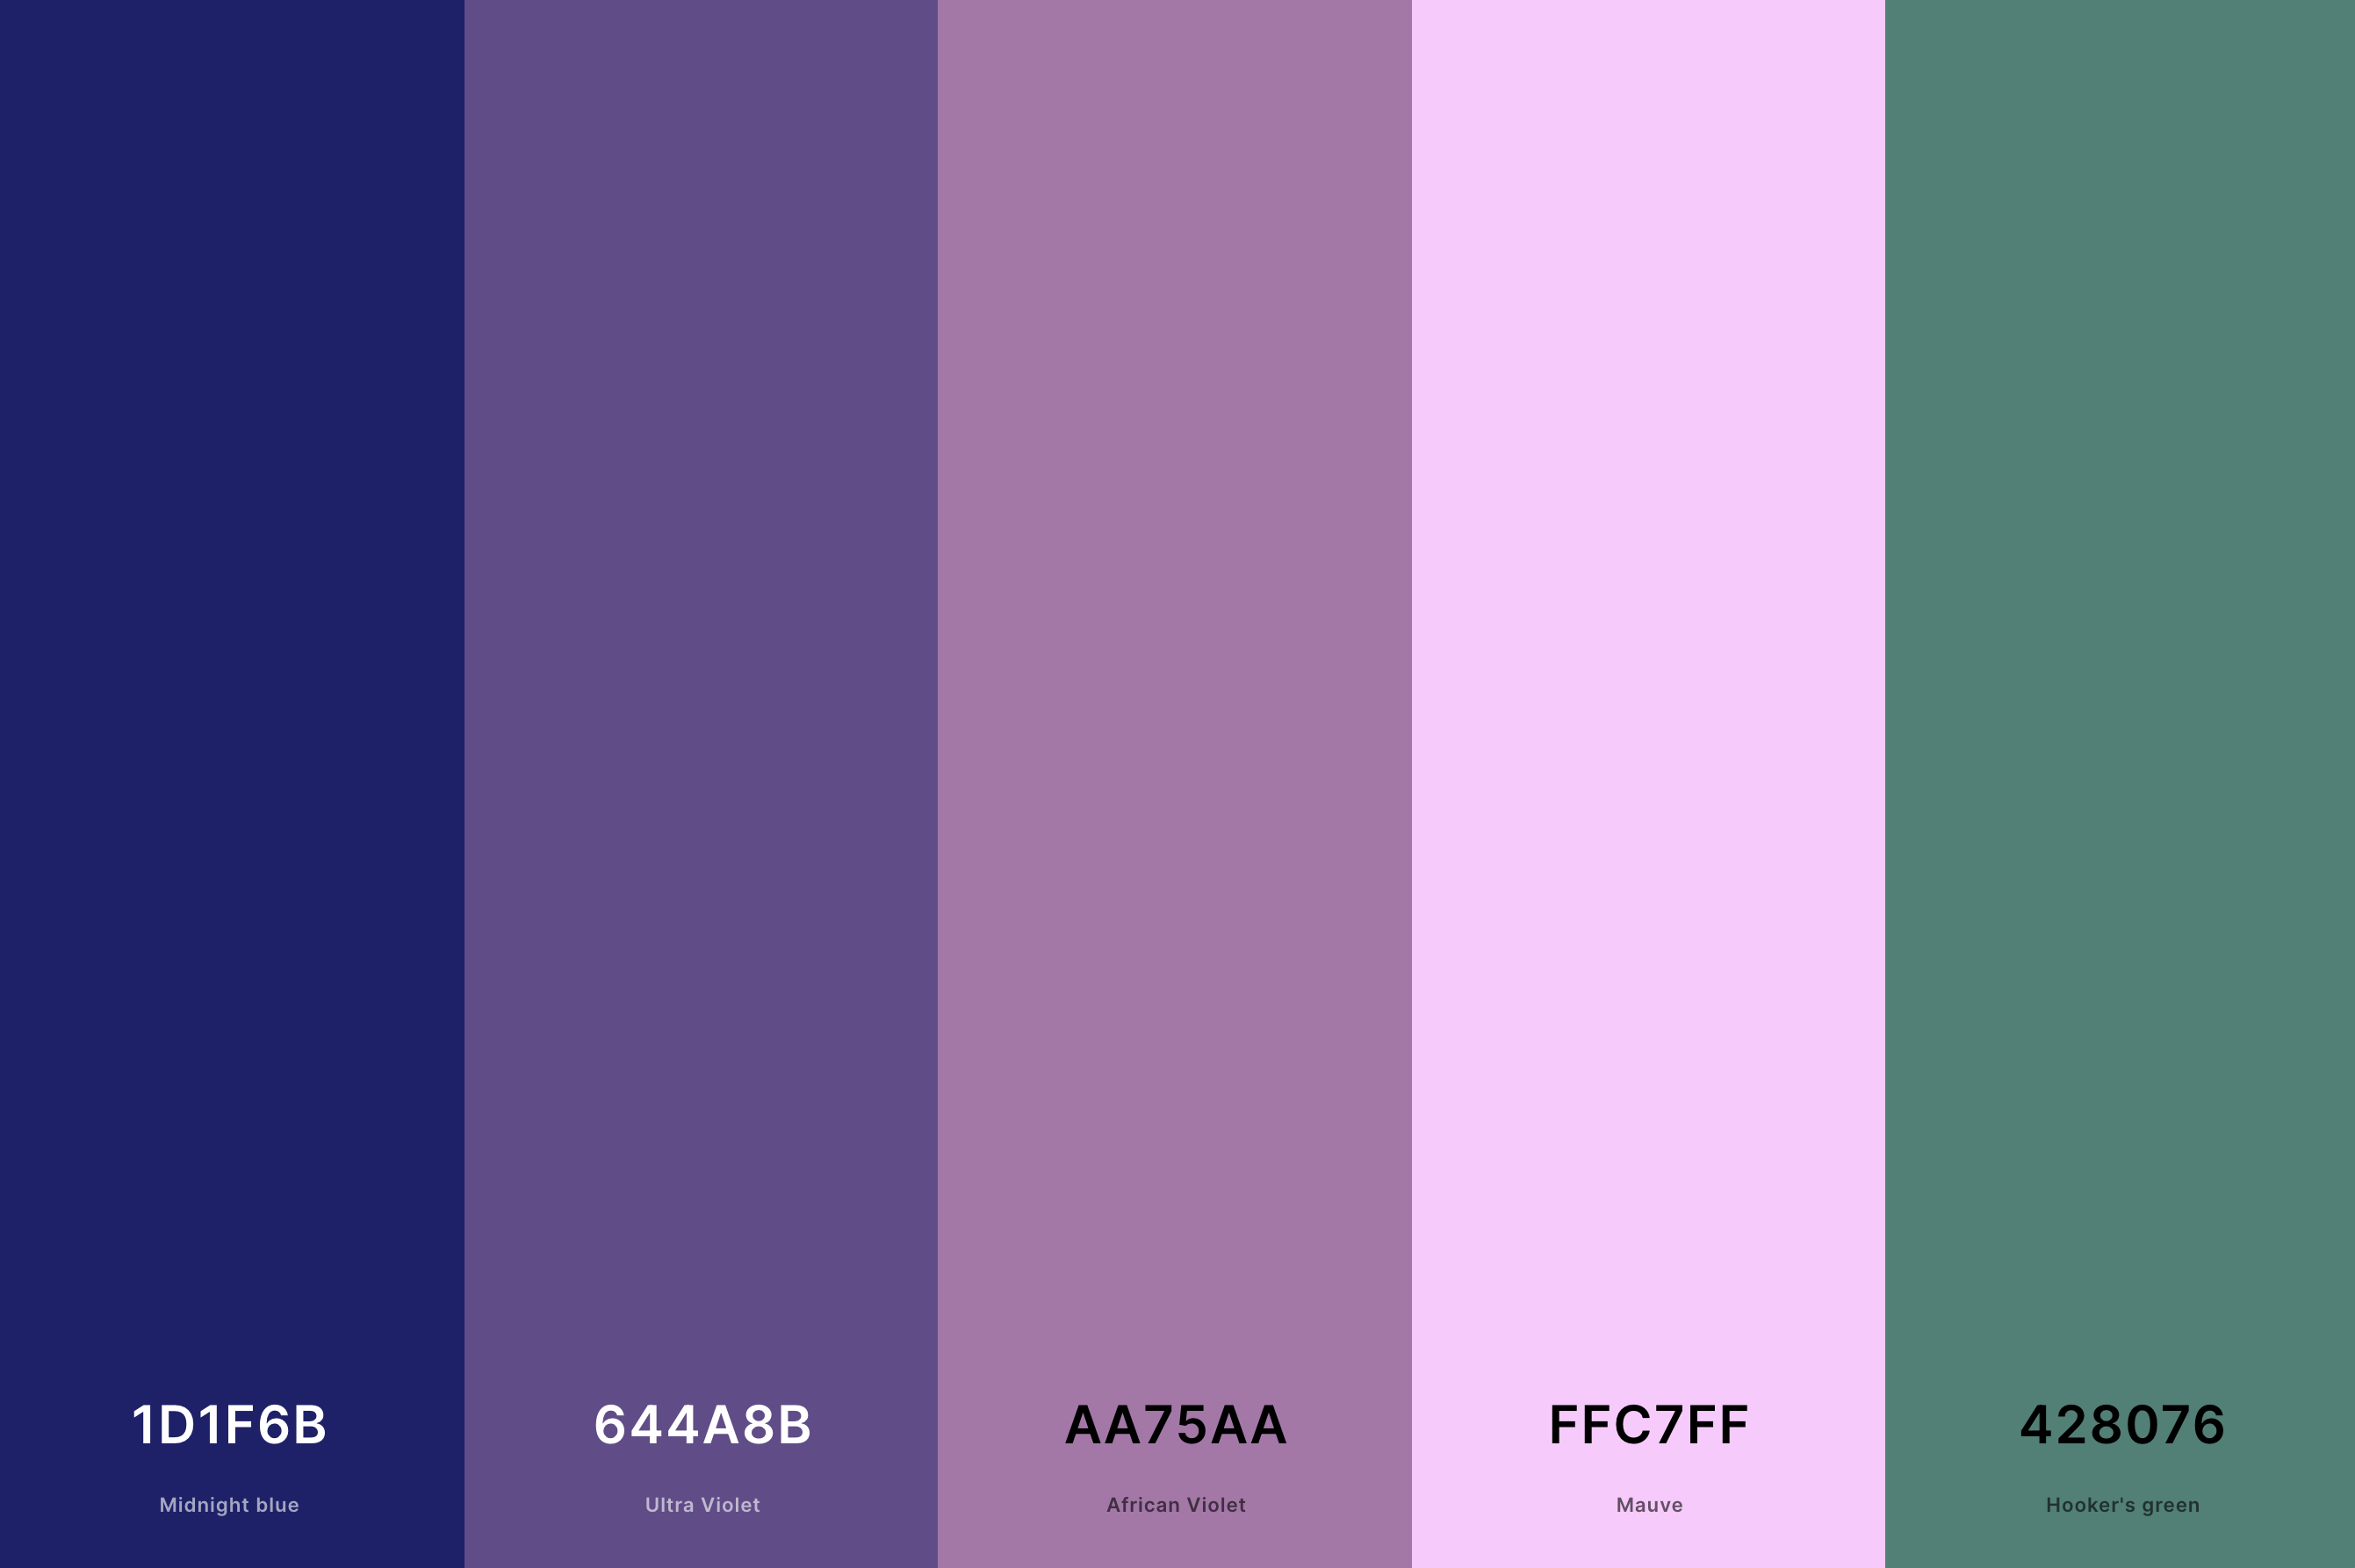 4. Mauve And Navy Color Palette Color Palette with Midnight Blue (Hex #1D1F6B) + Ultra Violet (Hex #644A8B) + African Violet (Hex #AA75AA) + Mauve (Hex #FFC7FF) + Hooker'S Green (Hex #428076) Color Palette with Hex Codes